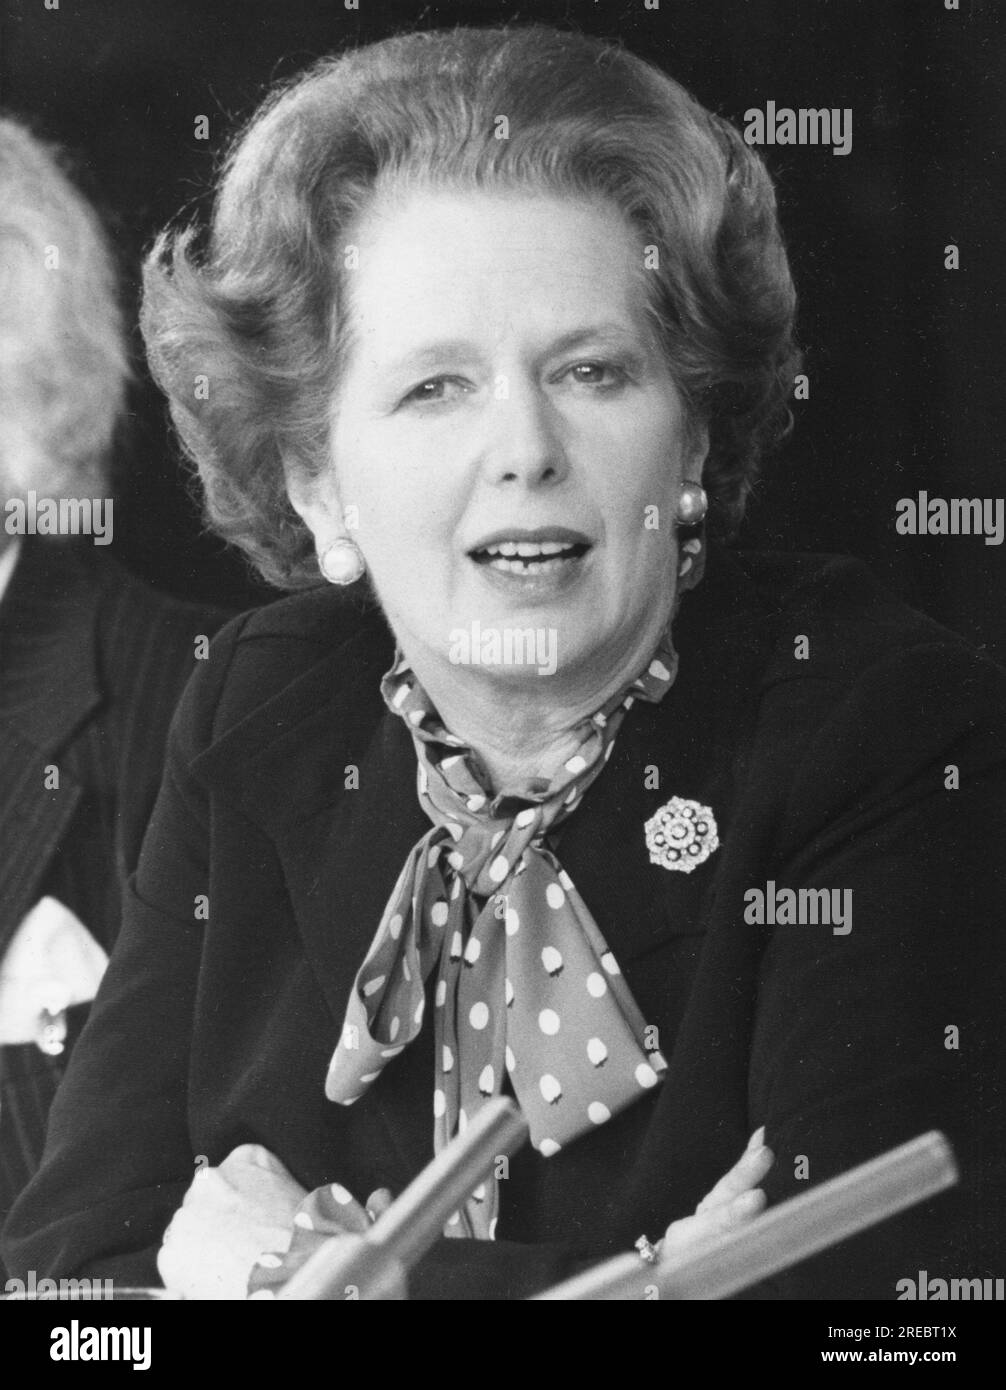 Thatcher, Margaret Hilda, 13.10.1925 - 8,4.2013, britischer Politiker (Cons.), ADDITIONAL-RIGHTS-CLEARANCE-INFO-NOT-AVAILABLE Stockfoto